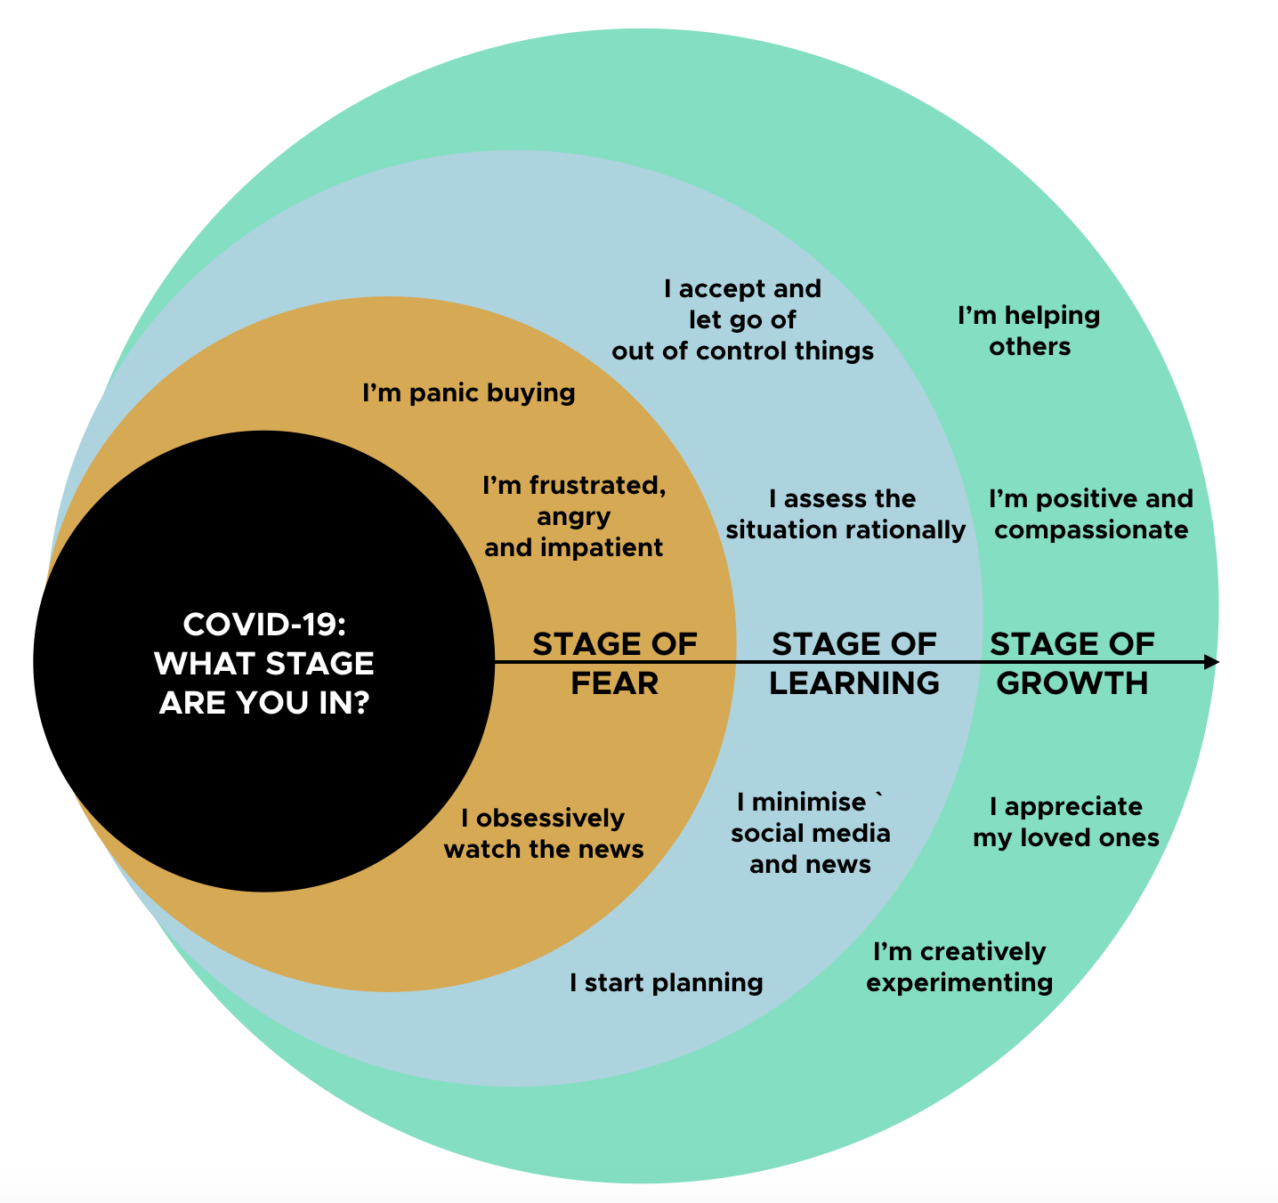 The getting out of your comfort zone model of Status quo/fear/ learning and growth applied to COVID-19